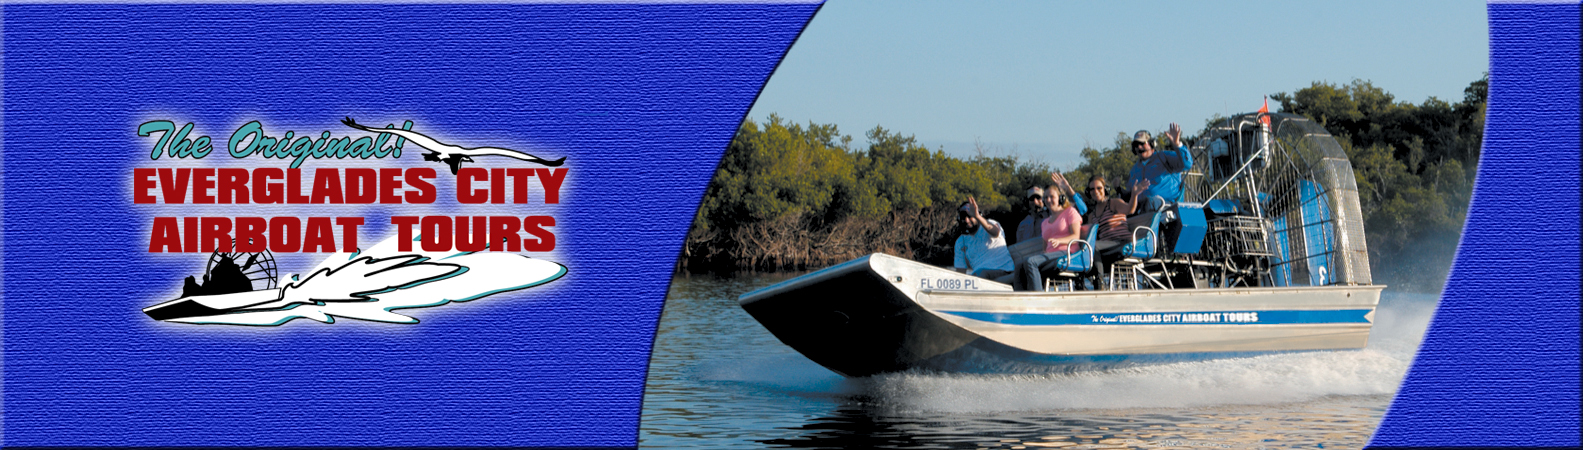 airboat tours cape coral